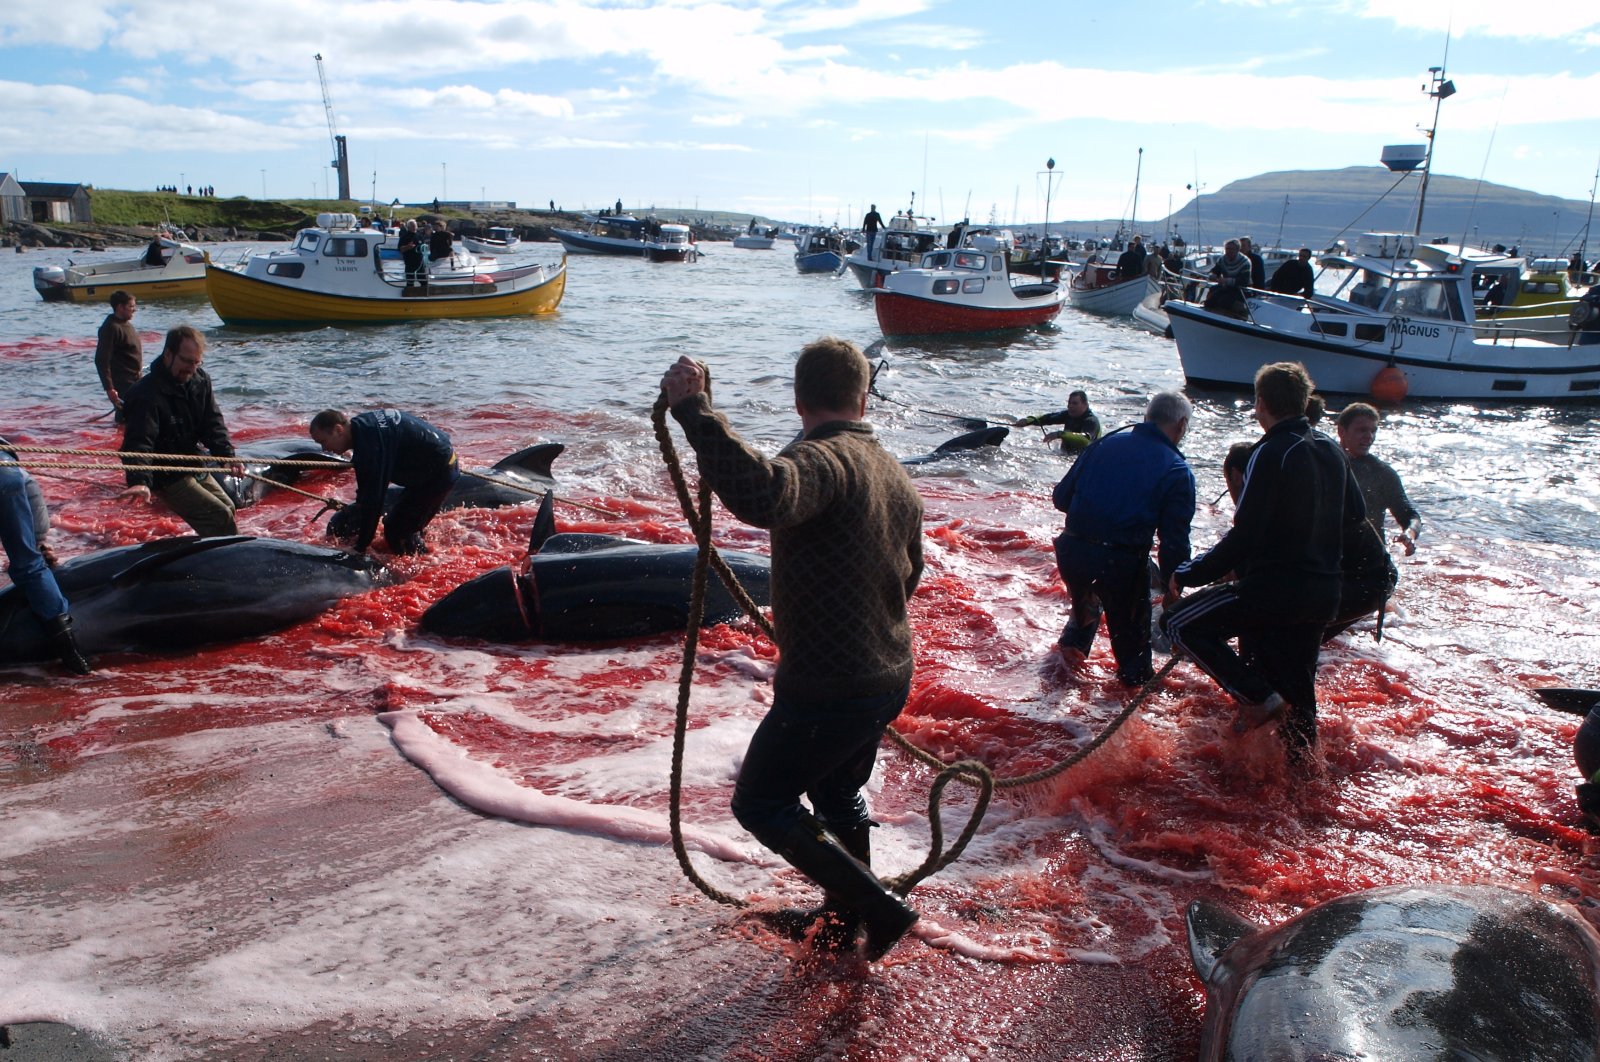 People participate in the traditional slaughter of white-sided dolphins and pilot whales, in Torshavn, Faroe Islands, July 23, 2010. (Shutterstock Photo)